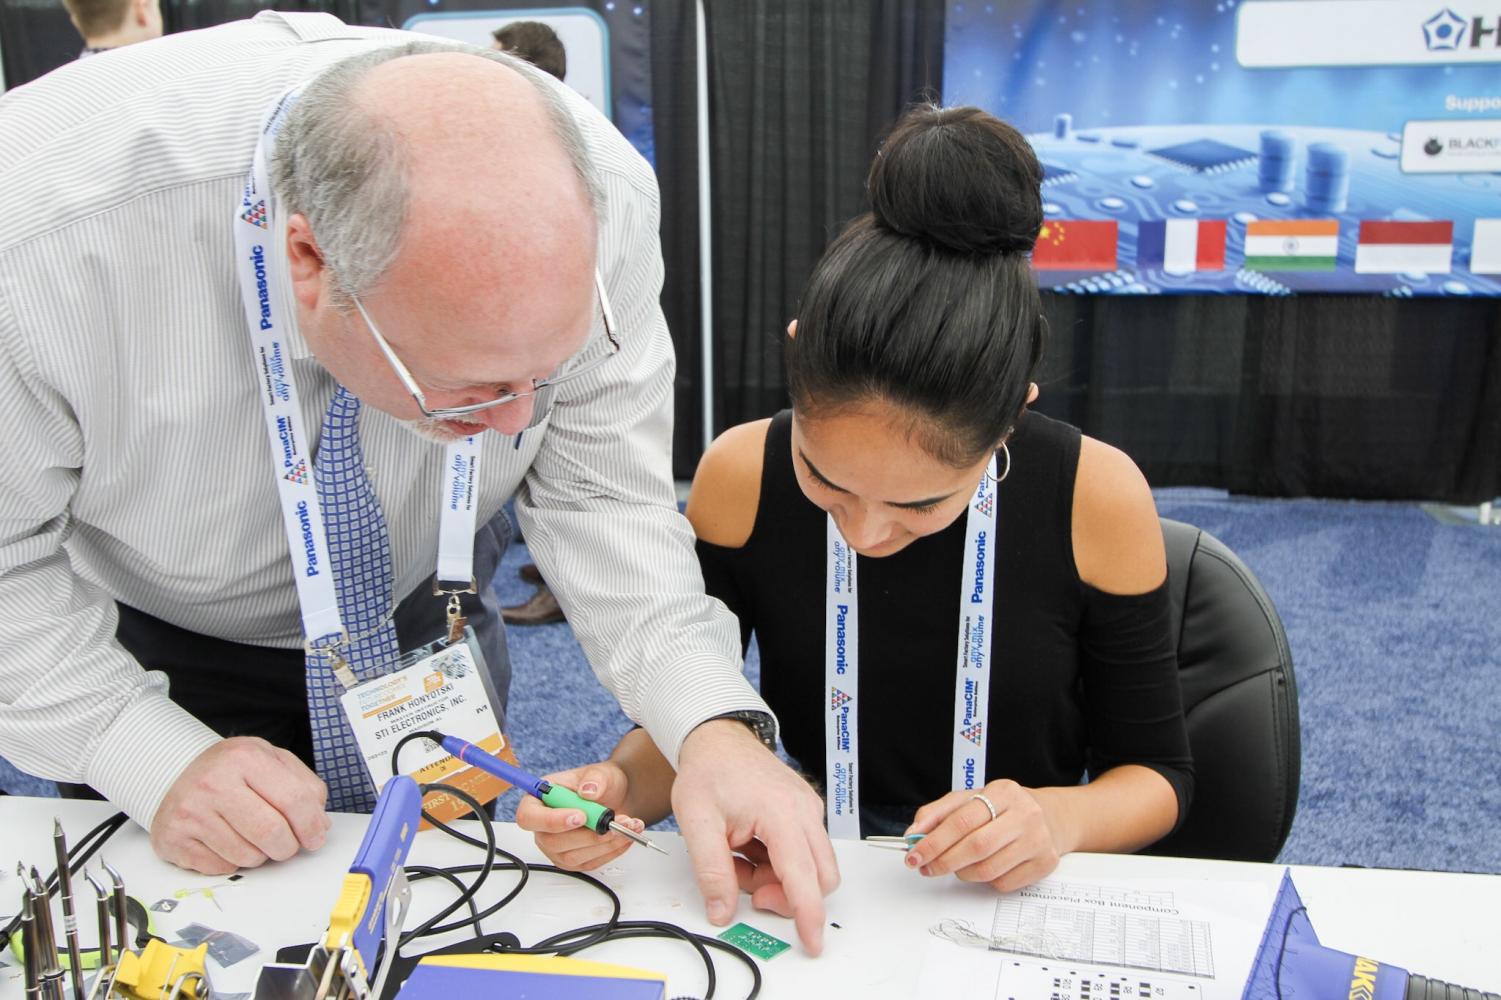 IPC+builds+future+engineers+at+the+APEX+EXPO+2019